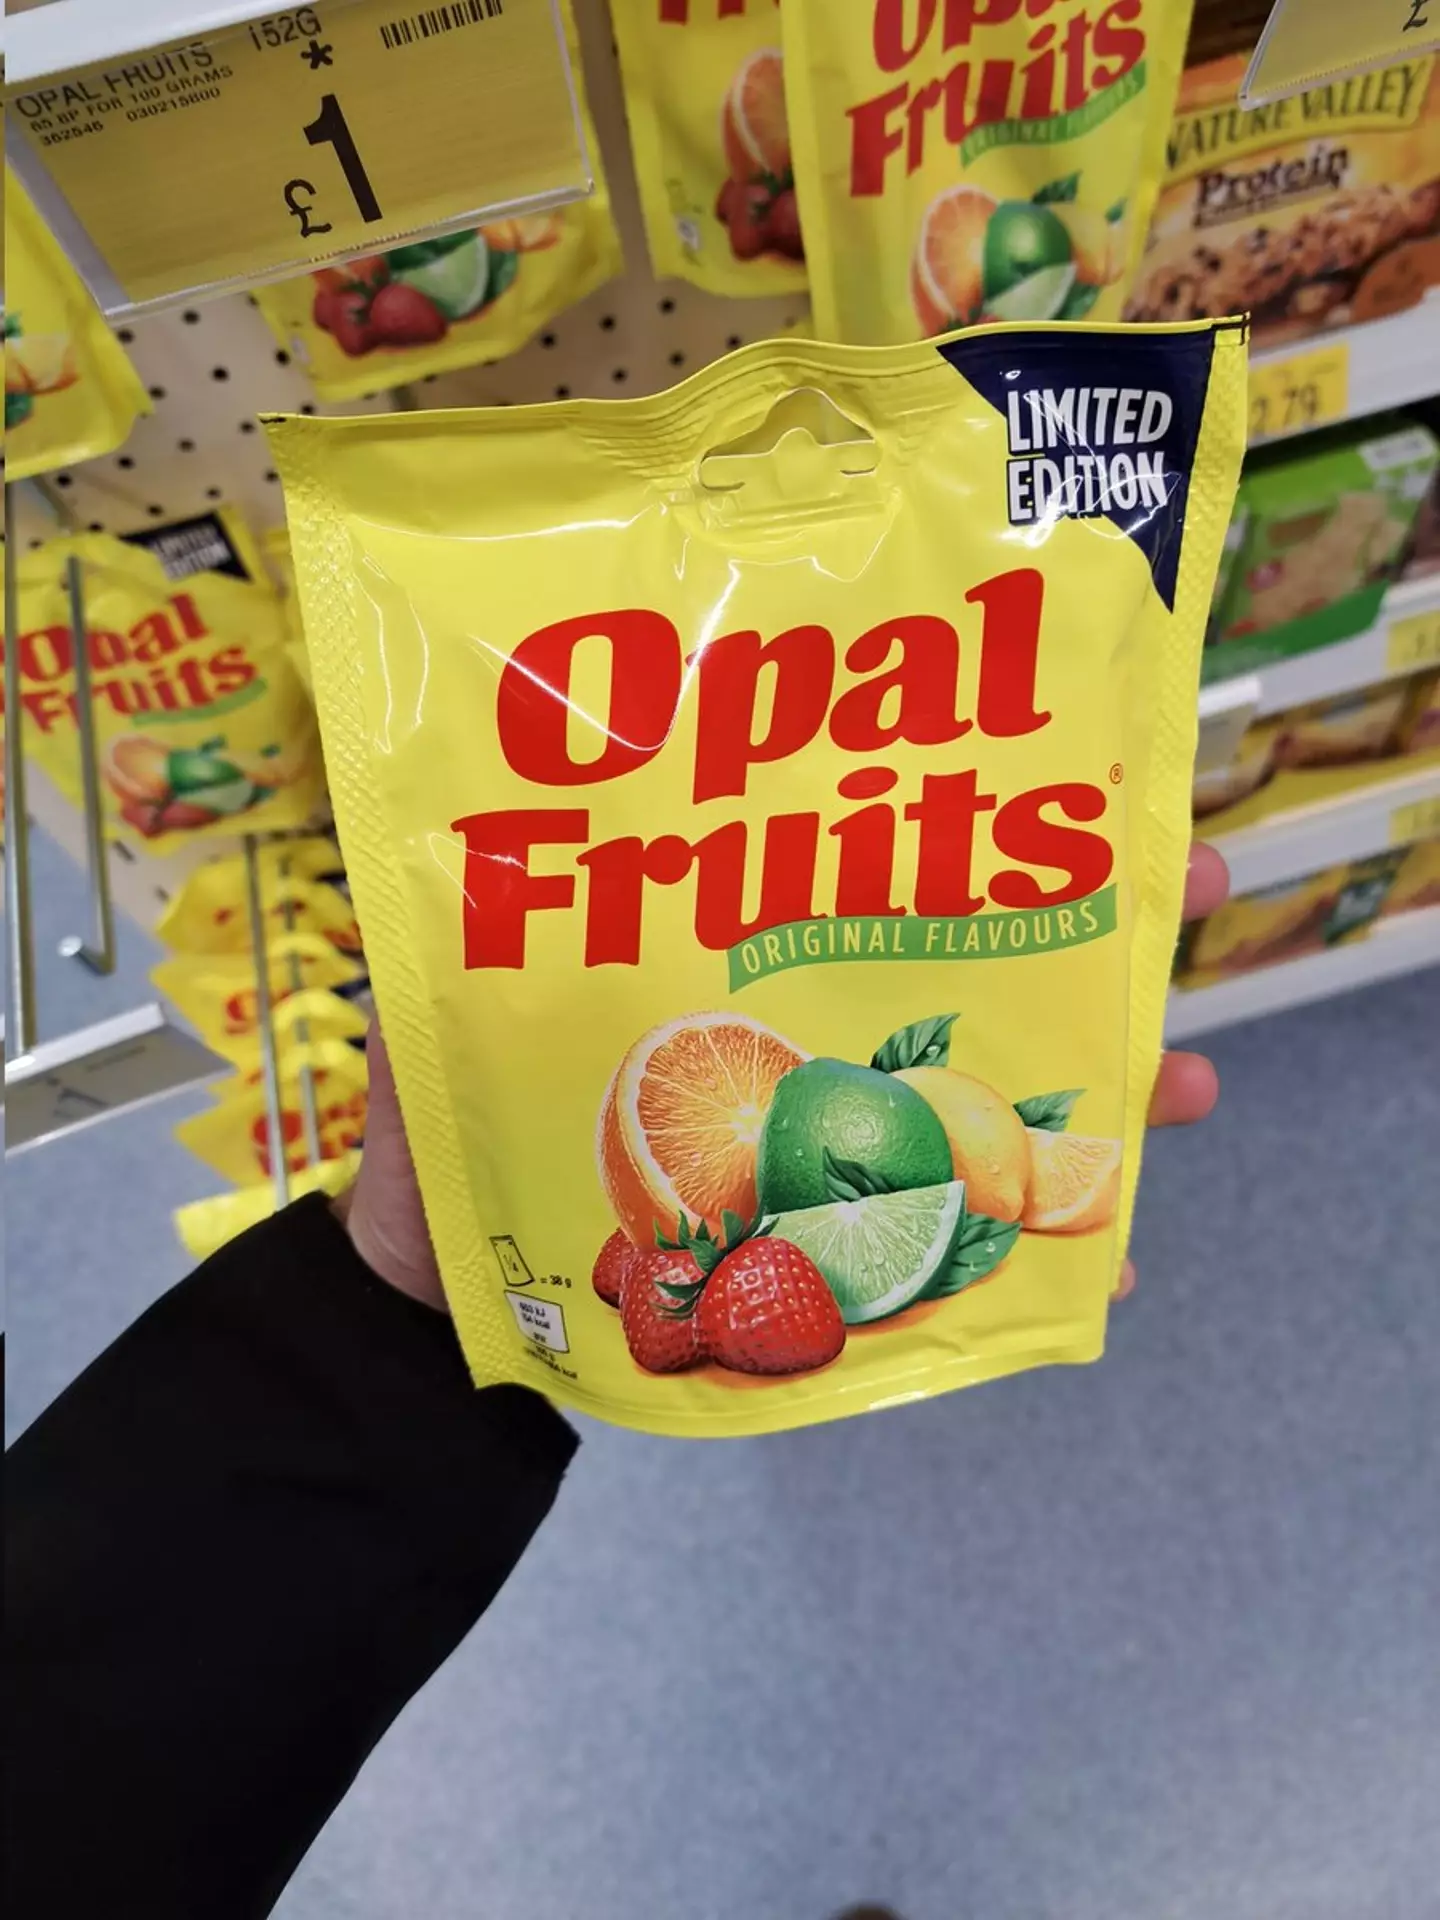 "We have Opal Fruits if anyone is interested?"